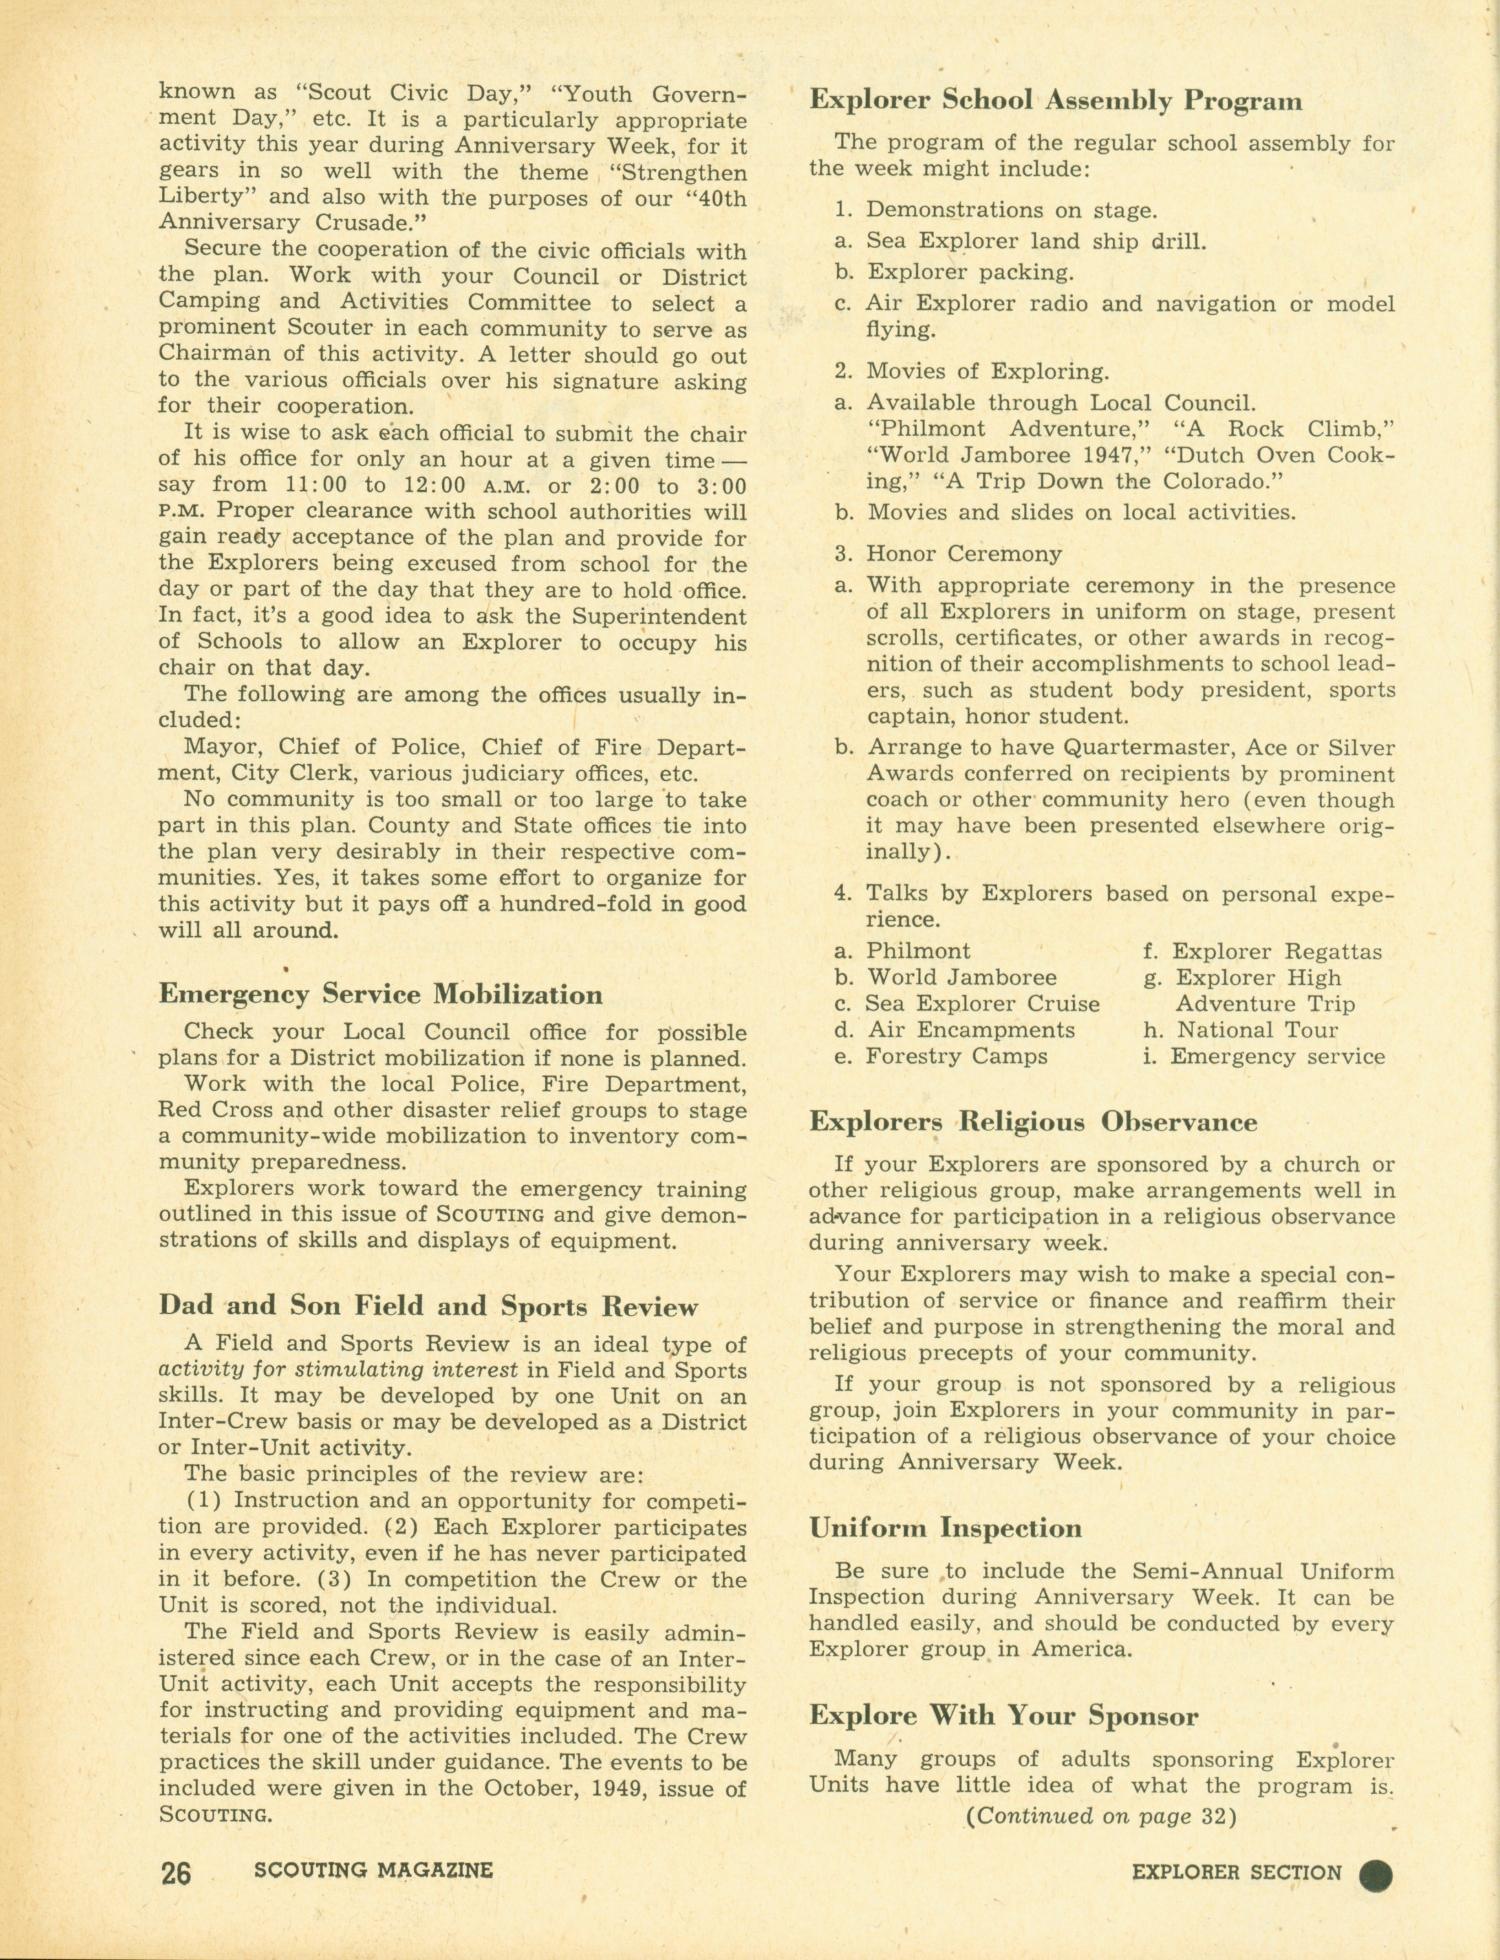 Scouting, Volume 38, Number 1, January 1950
                                                
                                                    26
                                                